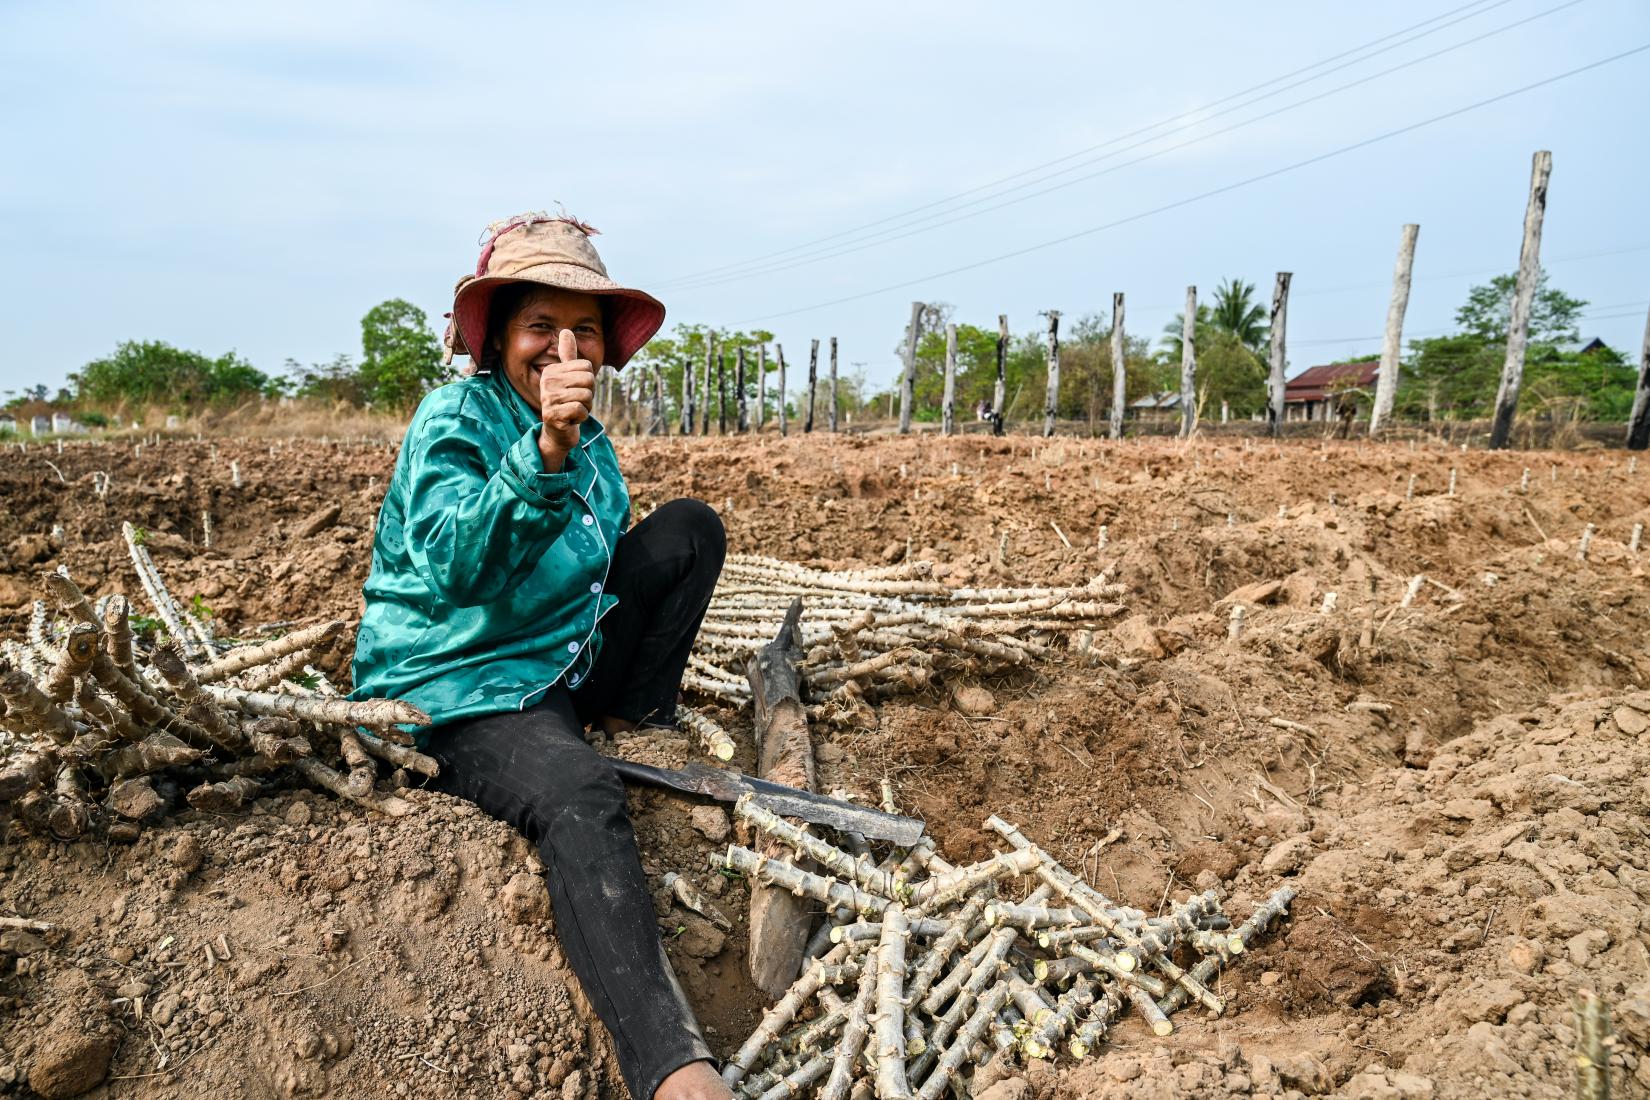 Woman smiling giving thumbs up sign sitting on crop of cassava in field